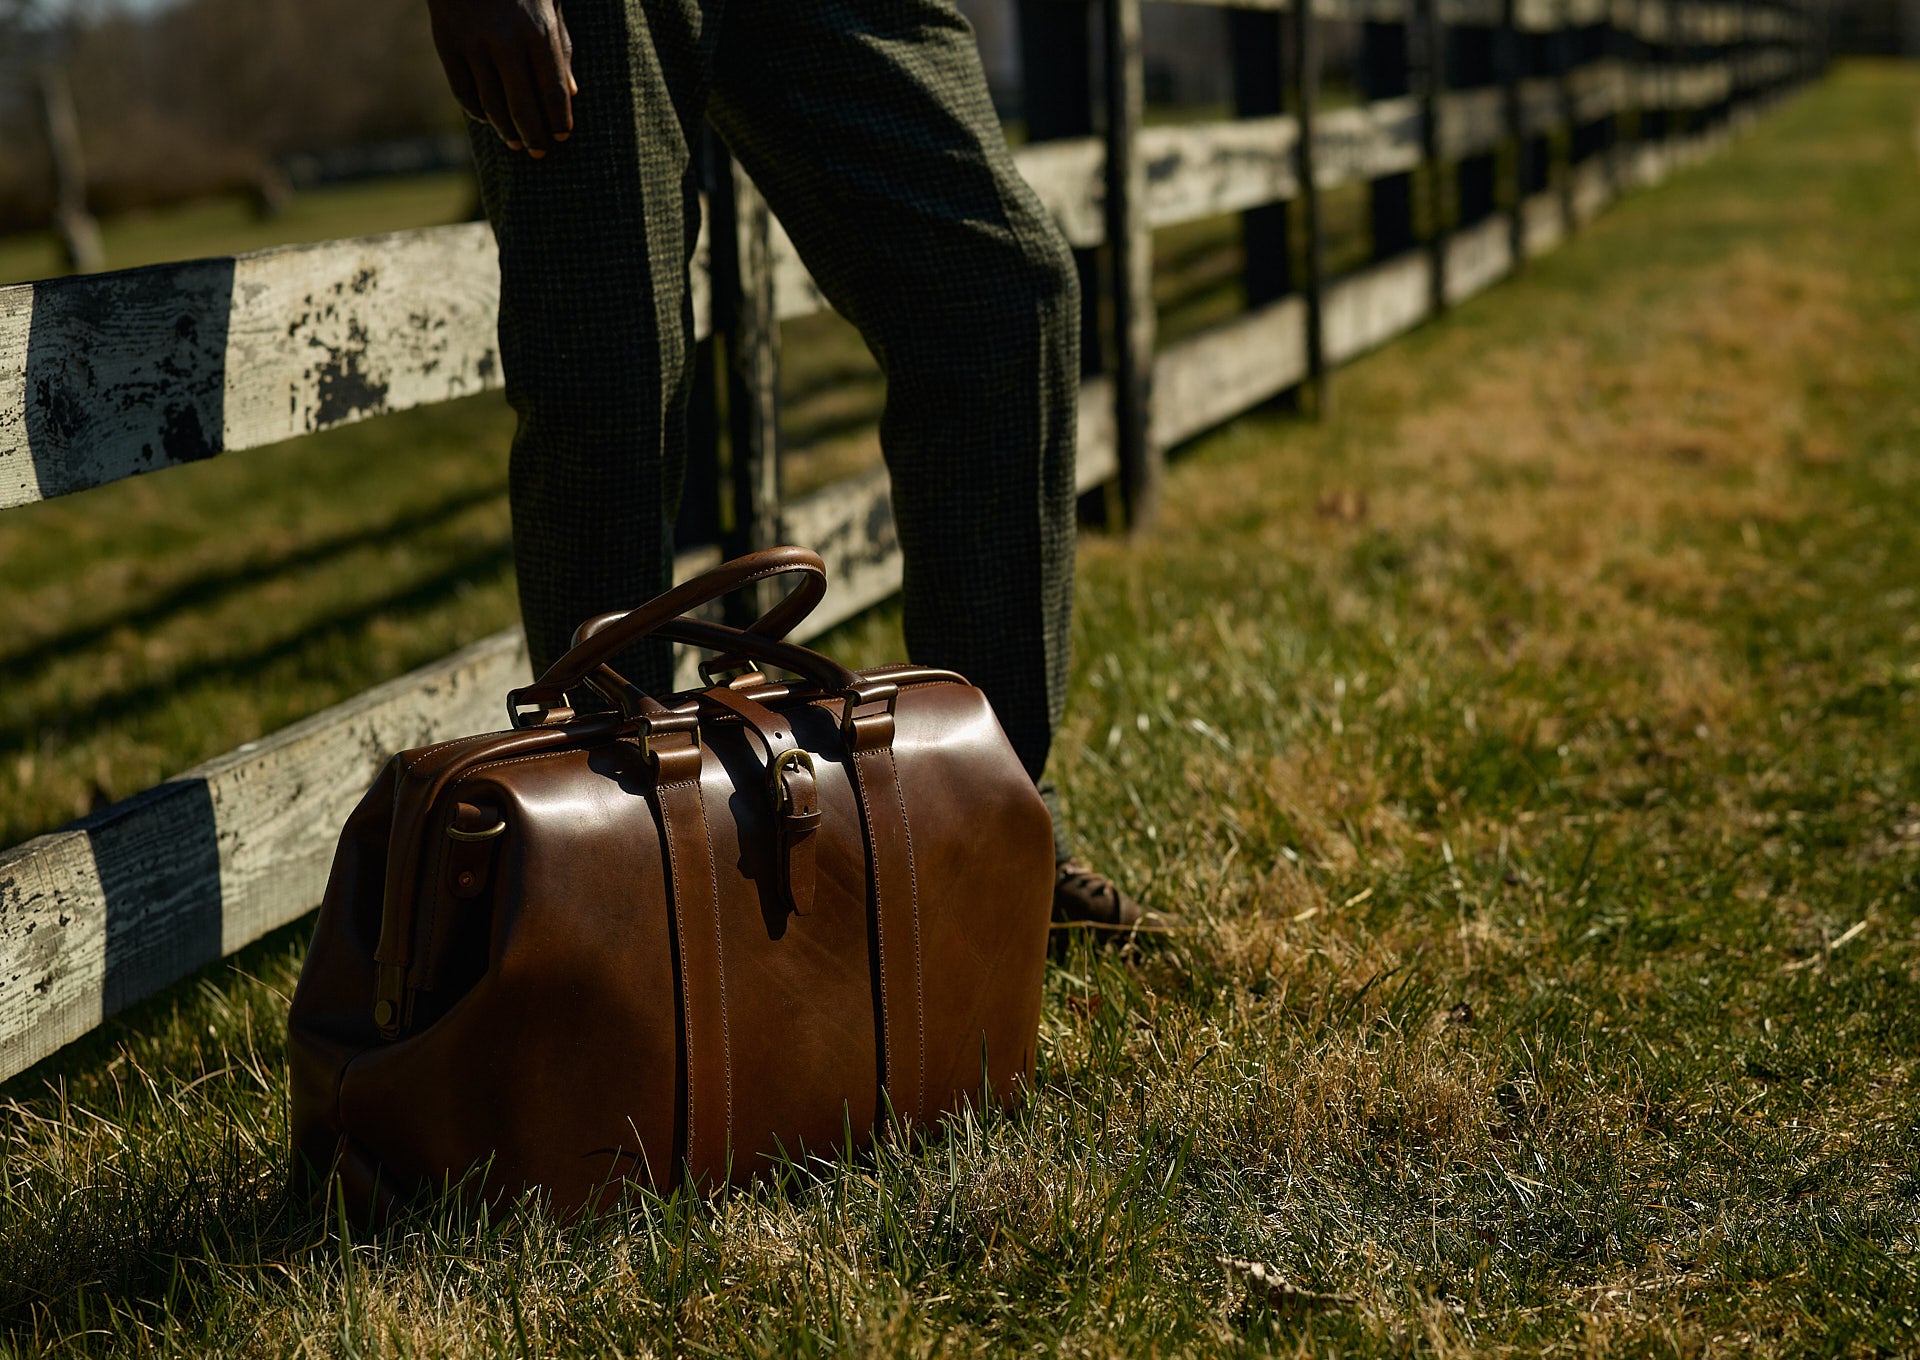 Travelling this Summer? Meet the Canvas & Leather Gladstone